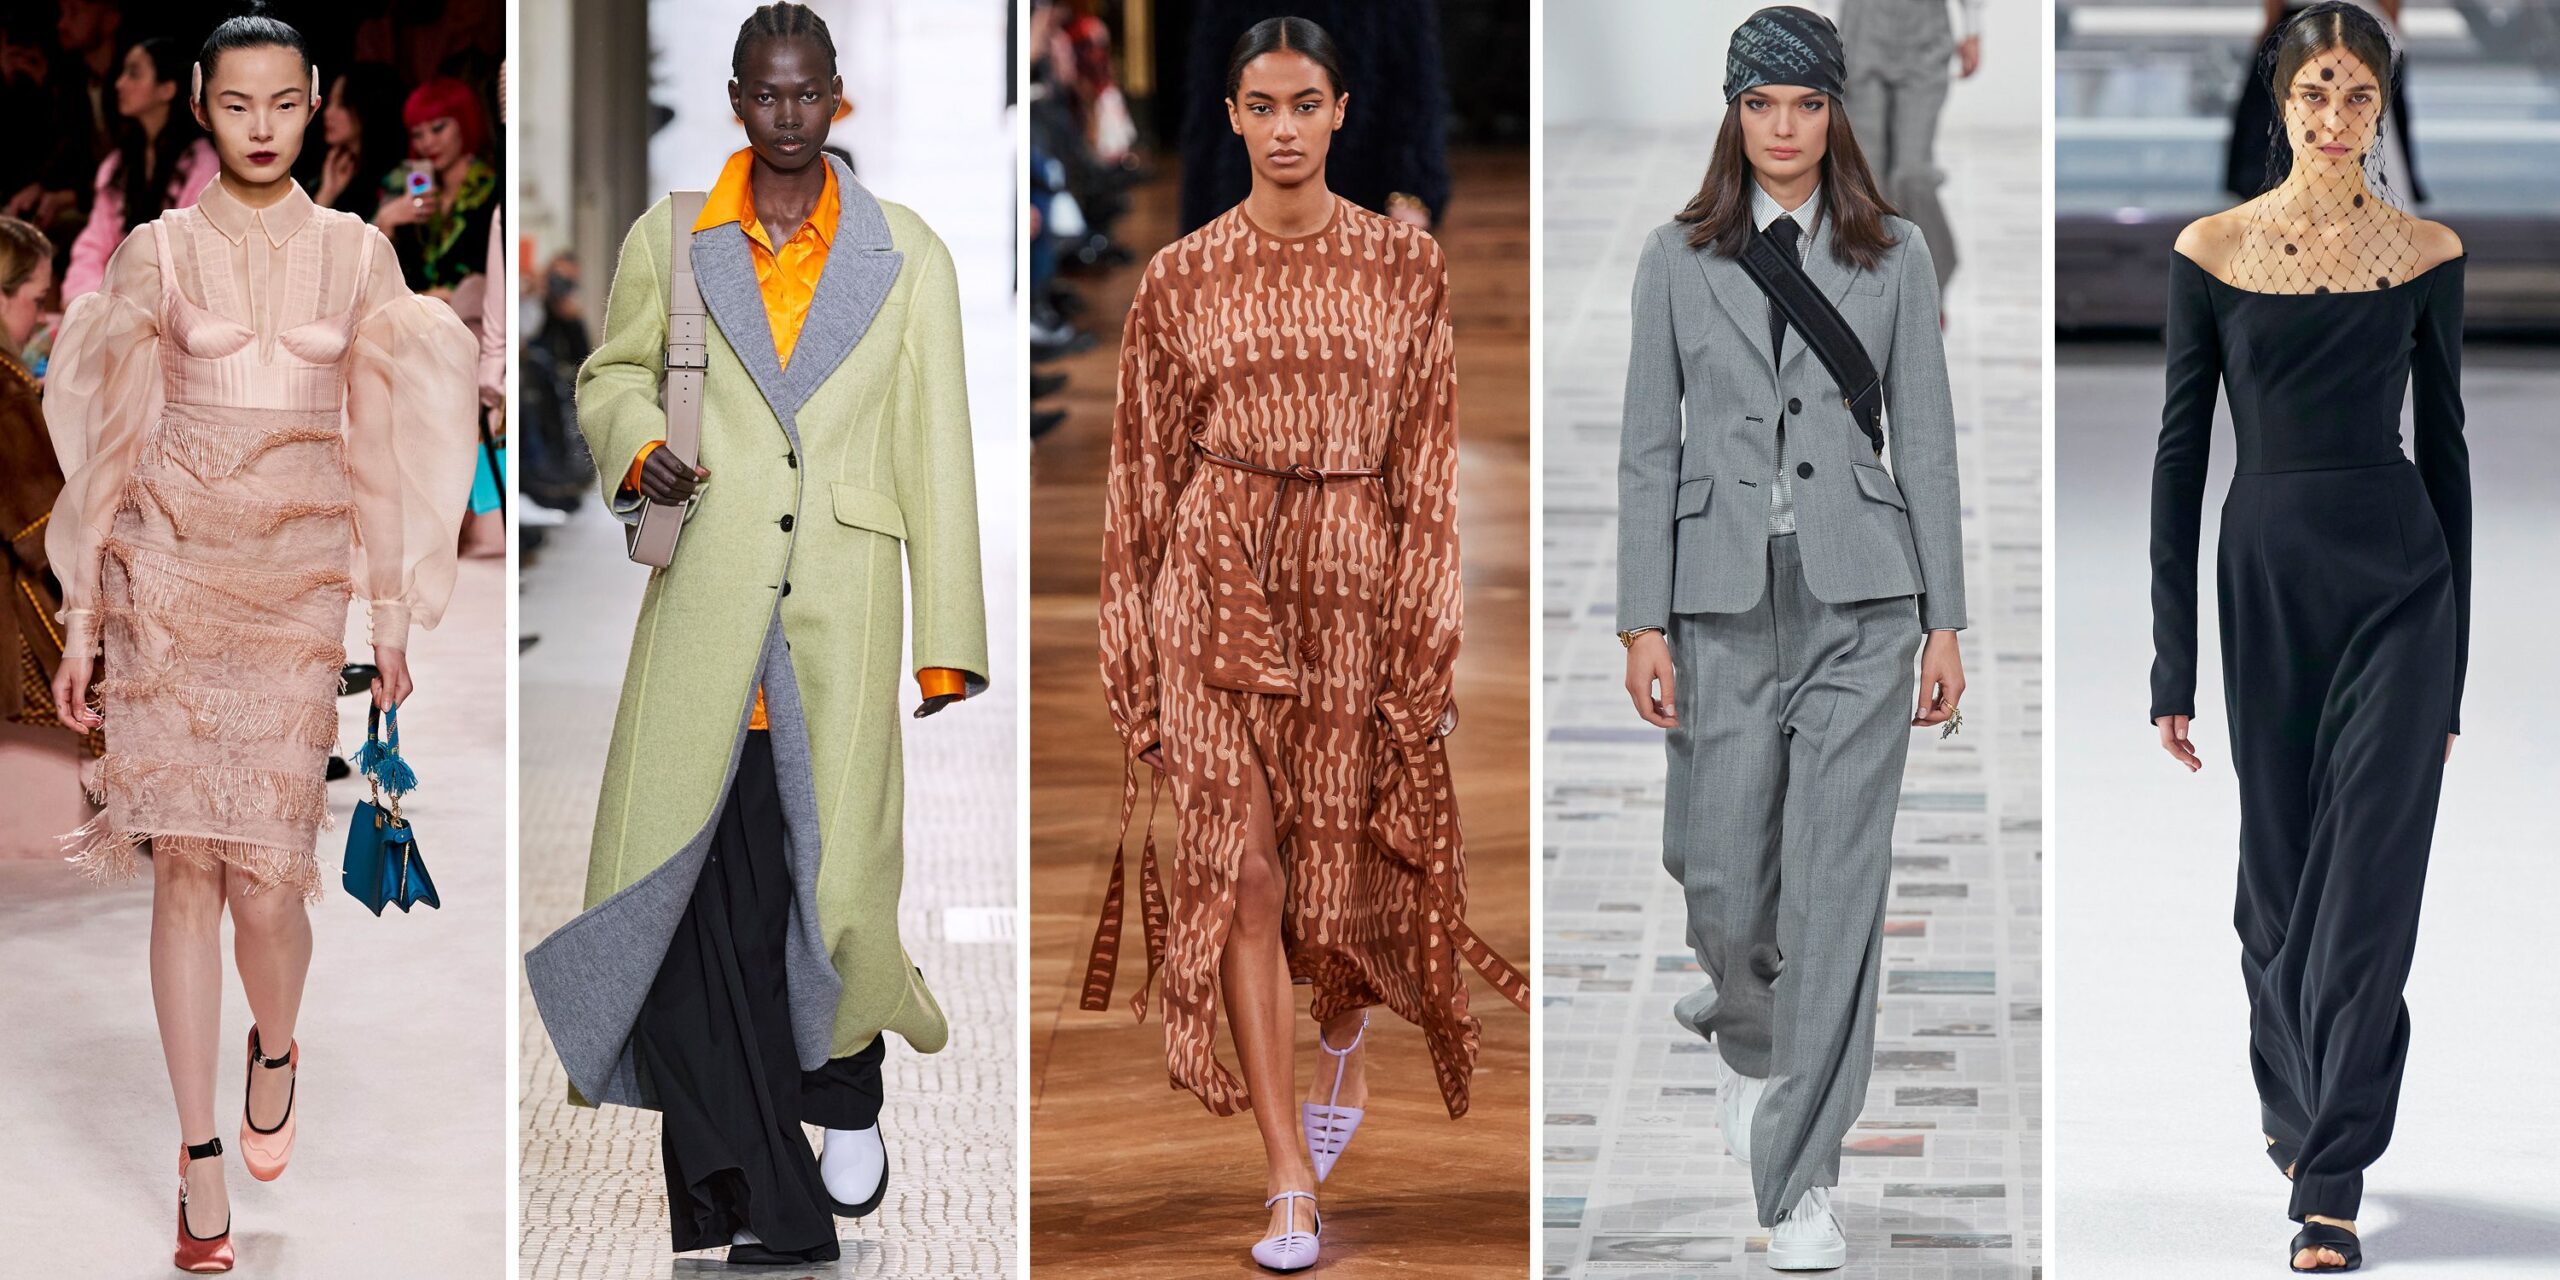 Palette Predictions: Stylish.ae’s Guide To The Colors Ruling The Runways